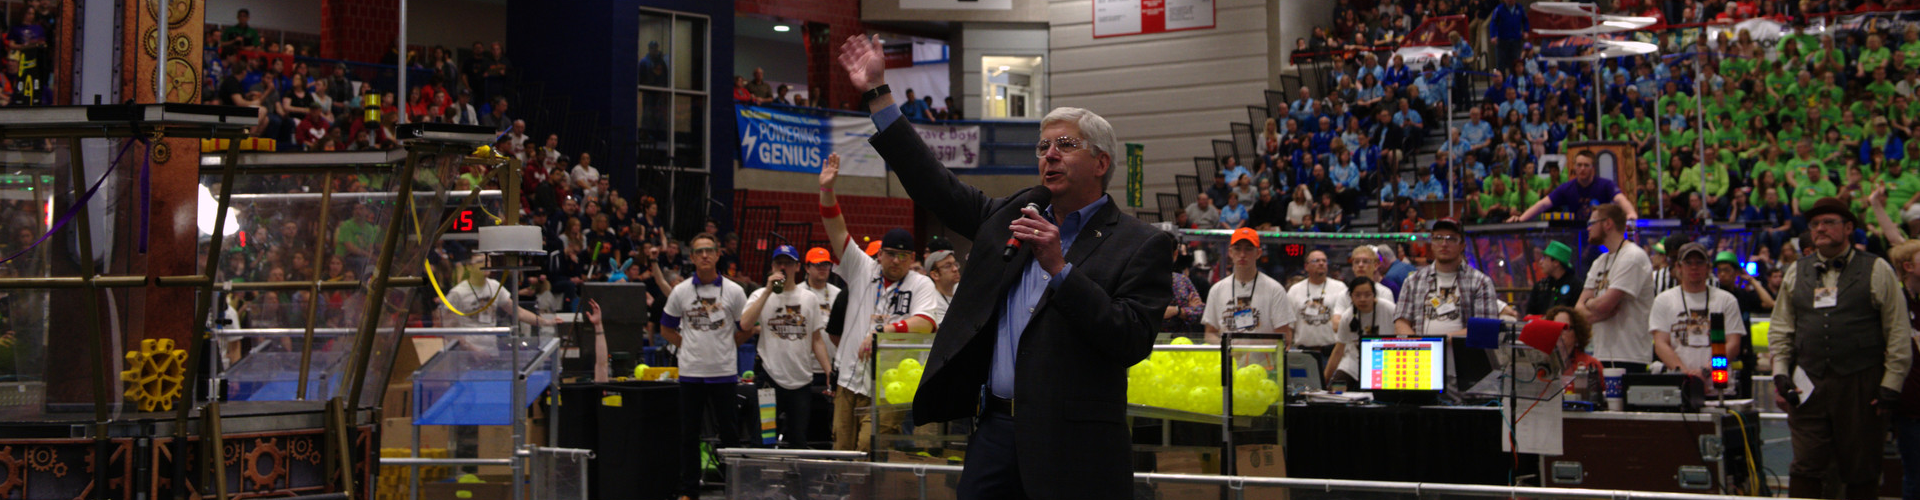 Rick Snyder First Robotics Competition 2017